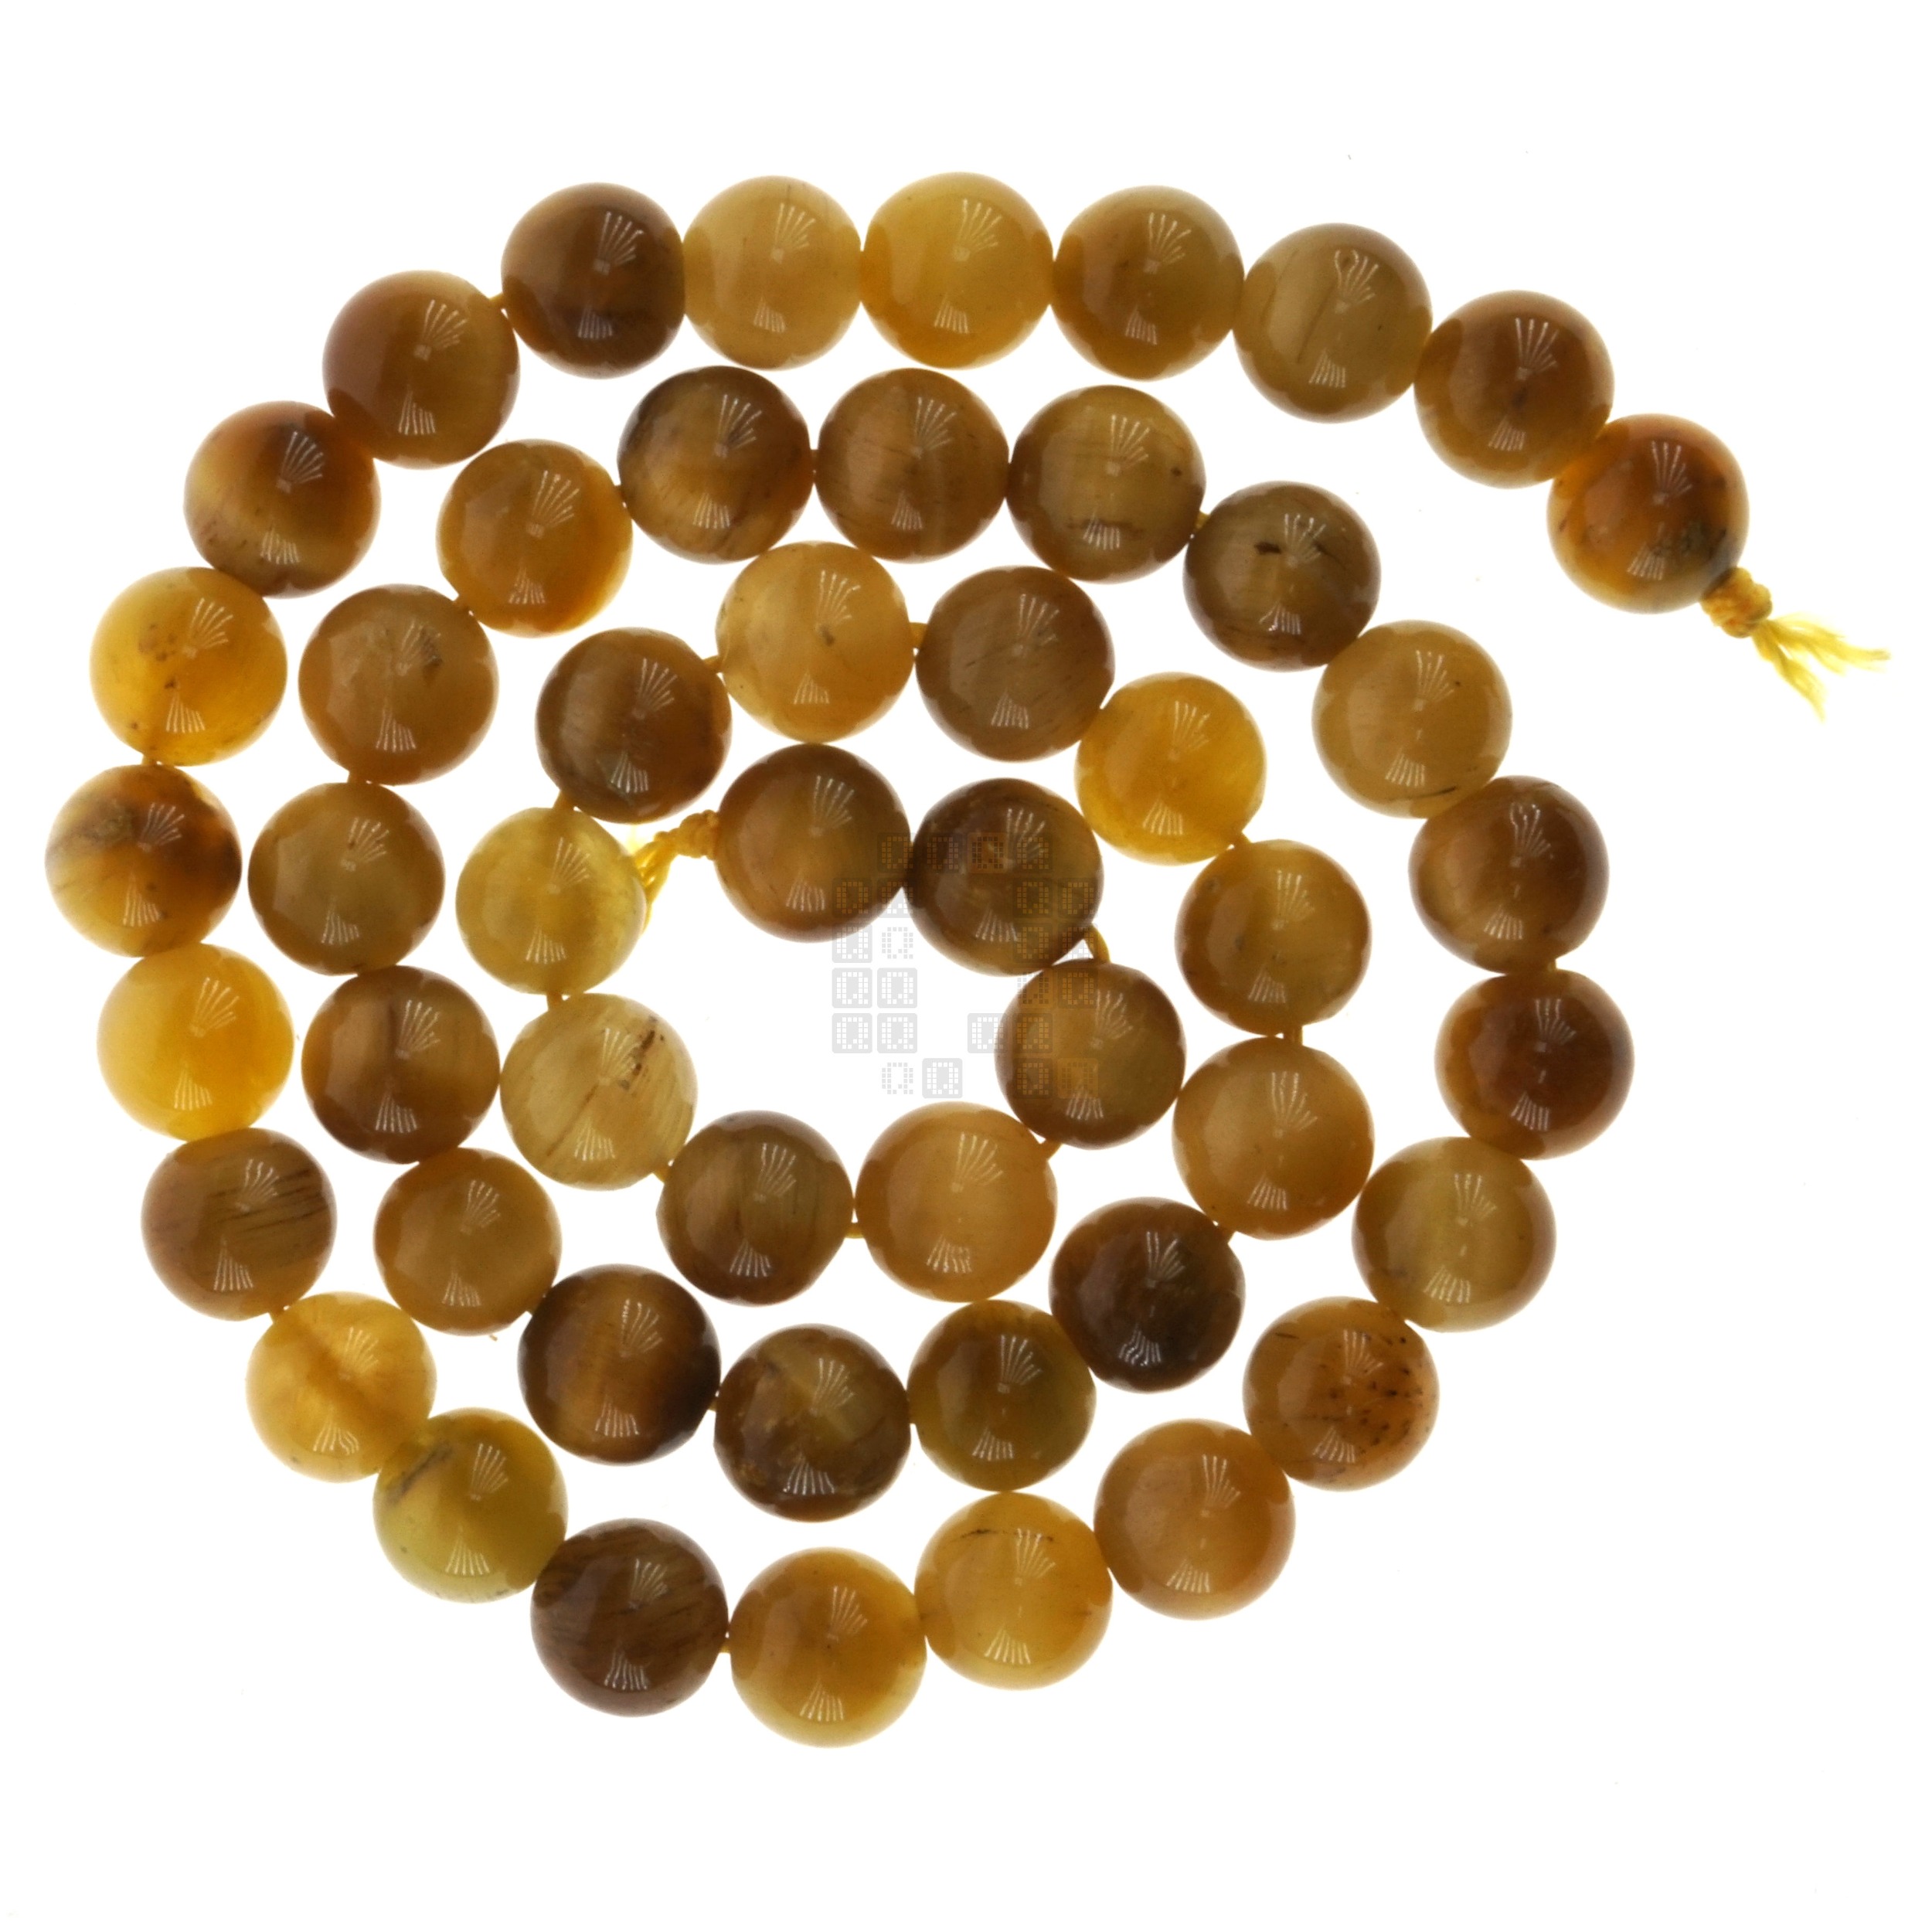 Gold Tiger Eye 8mm Round Glass Beads, 45 Pieces